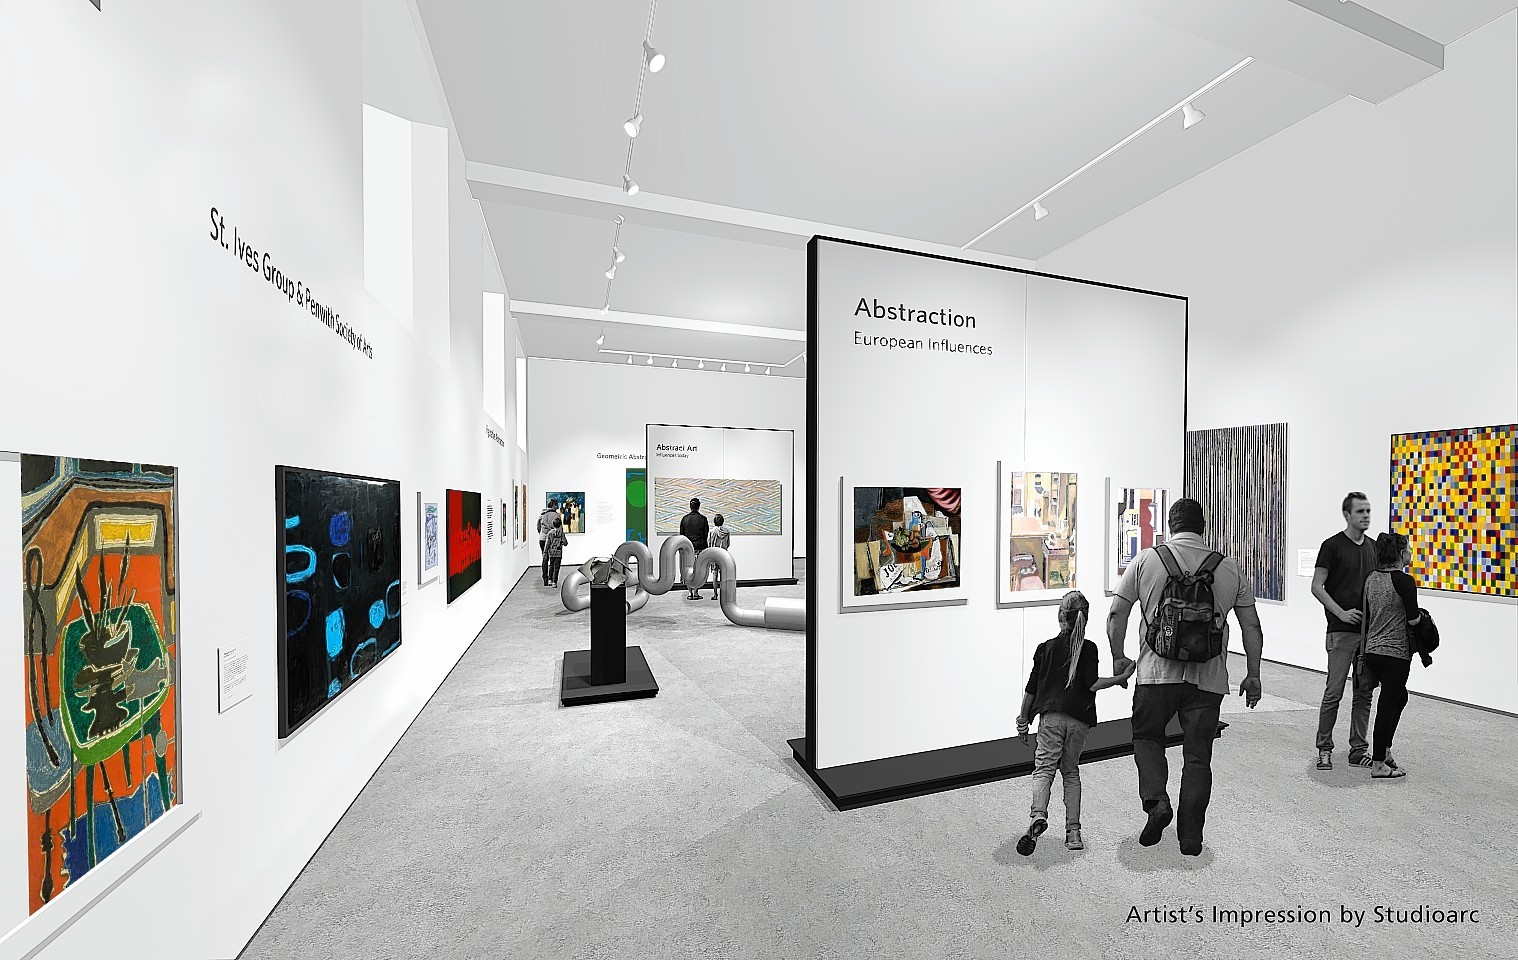 Artist impressions of what the work on Aberdeen Art Gallery were turn-out like